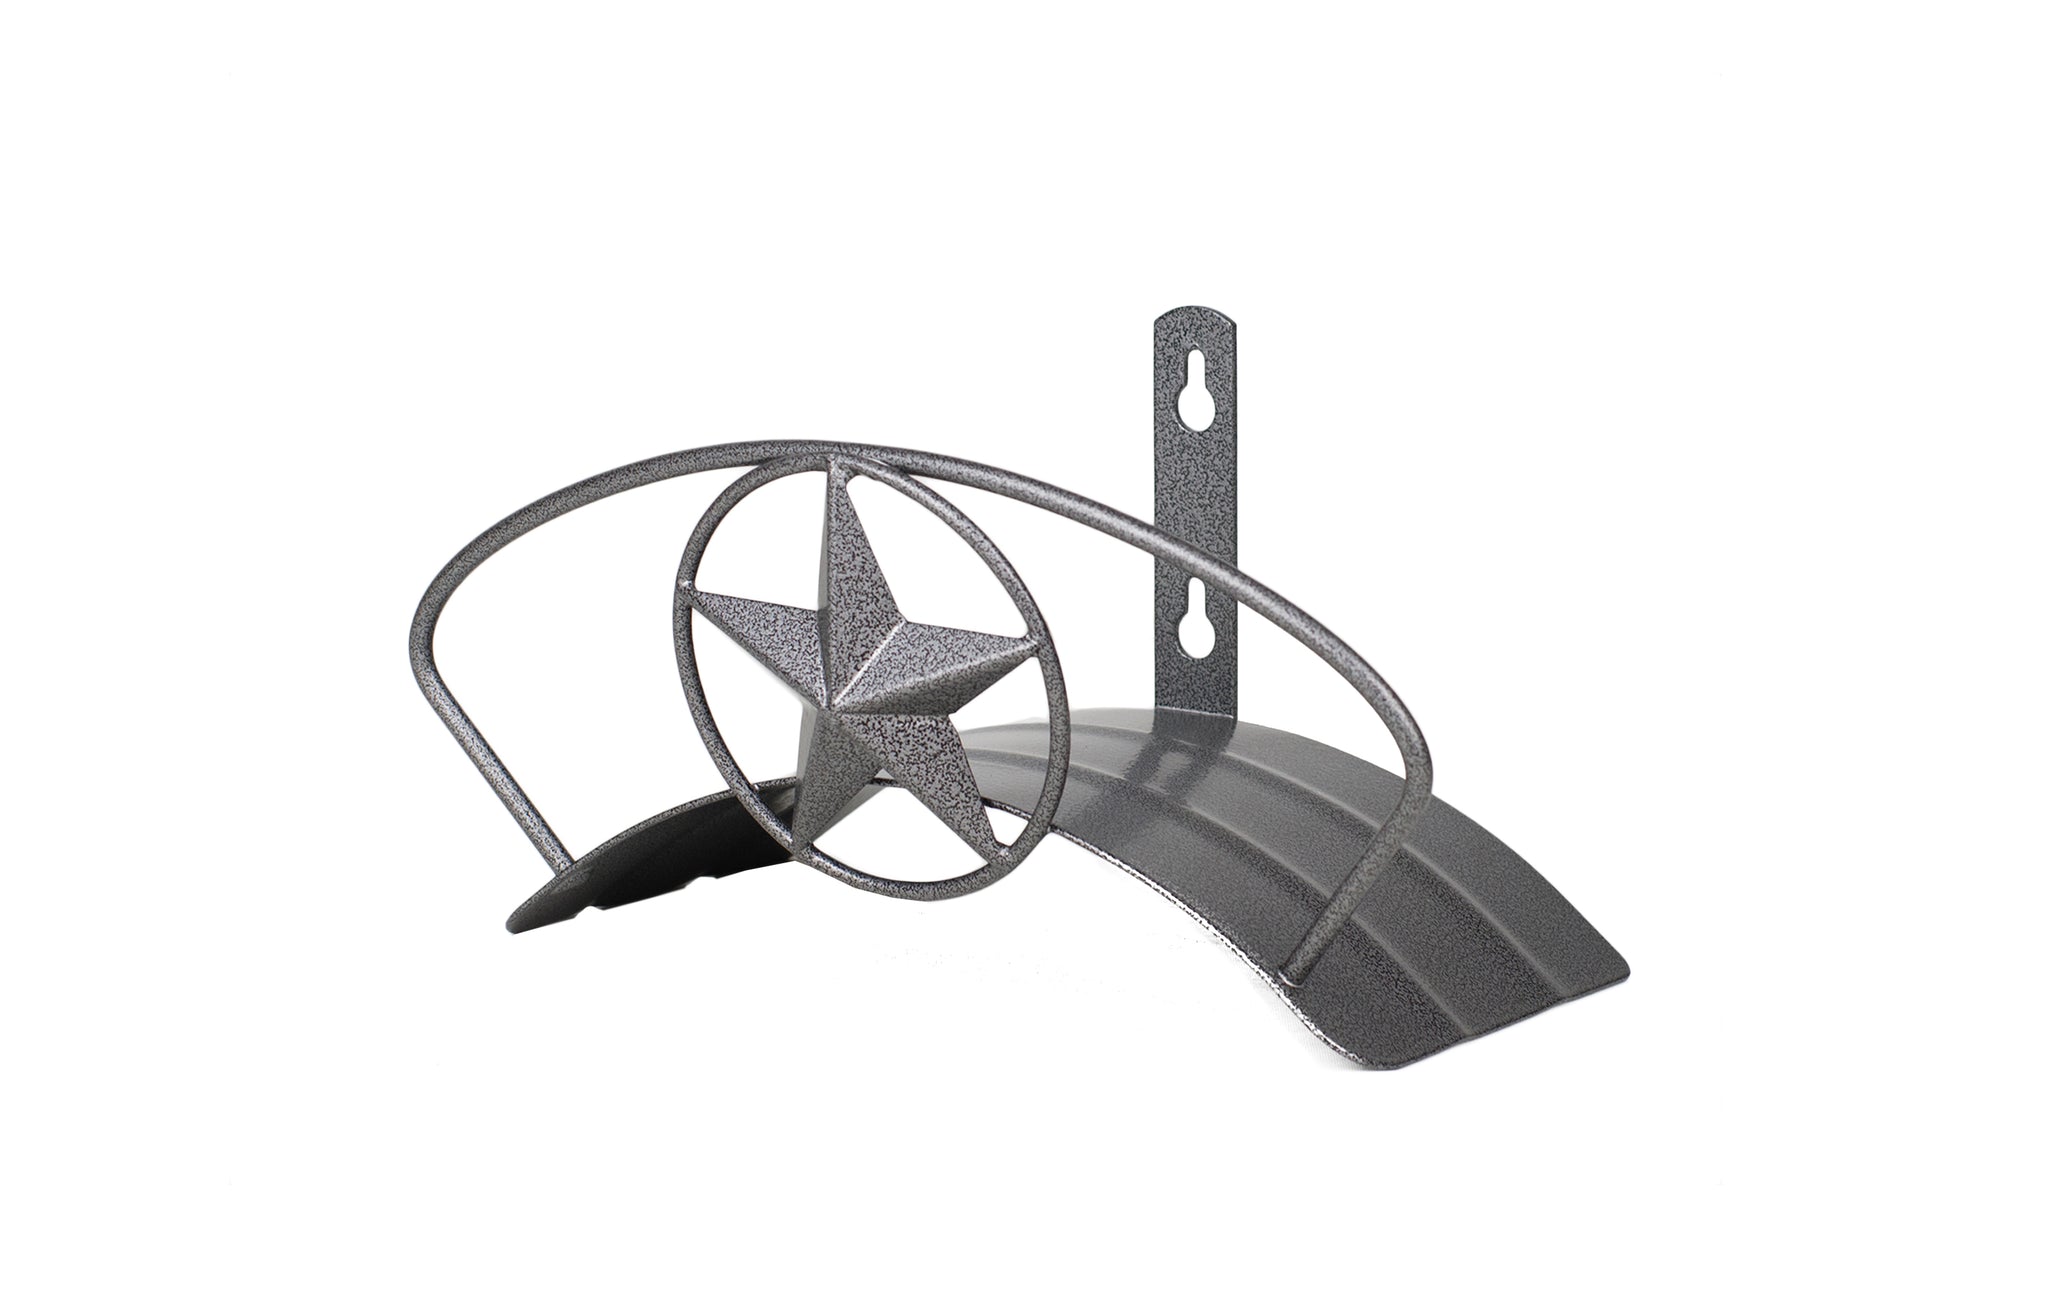 Heavy Duty Wall Mounted Hose Hanger for 125' - Star Design